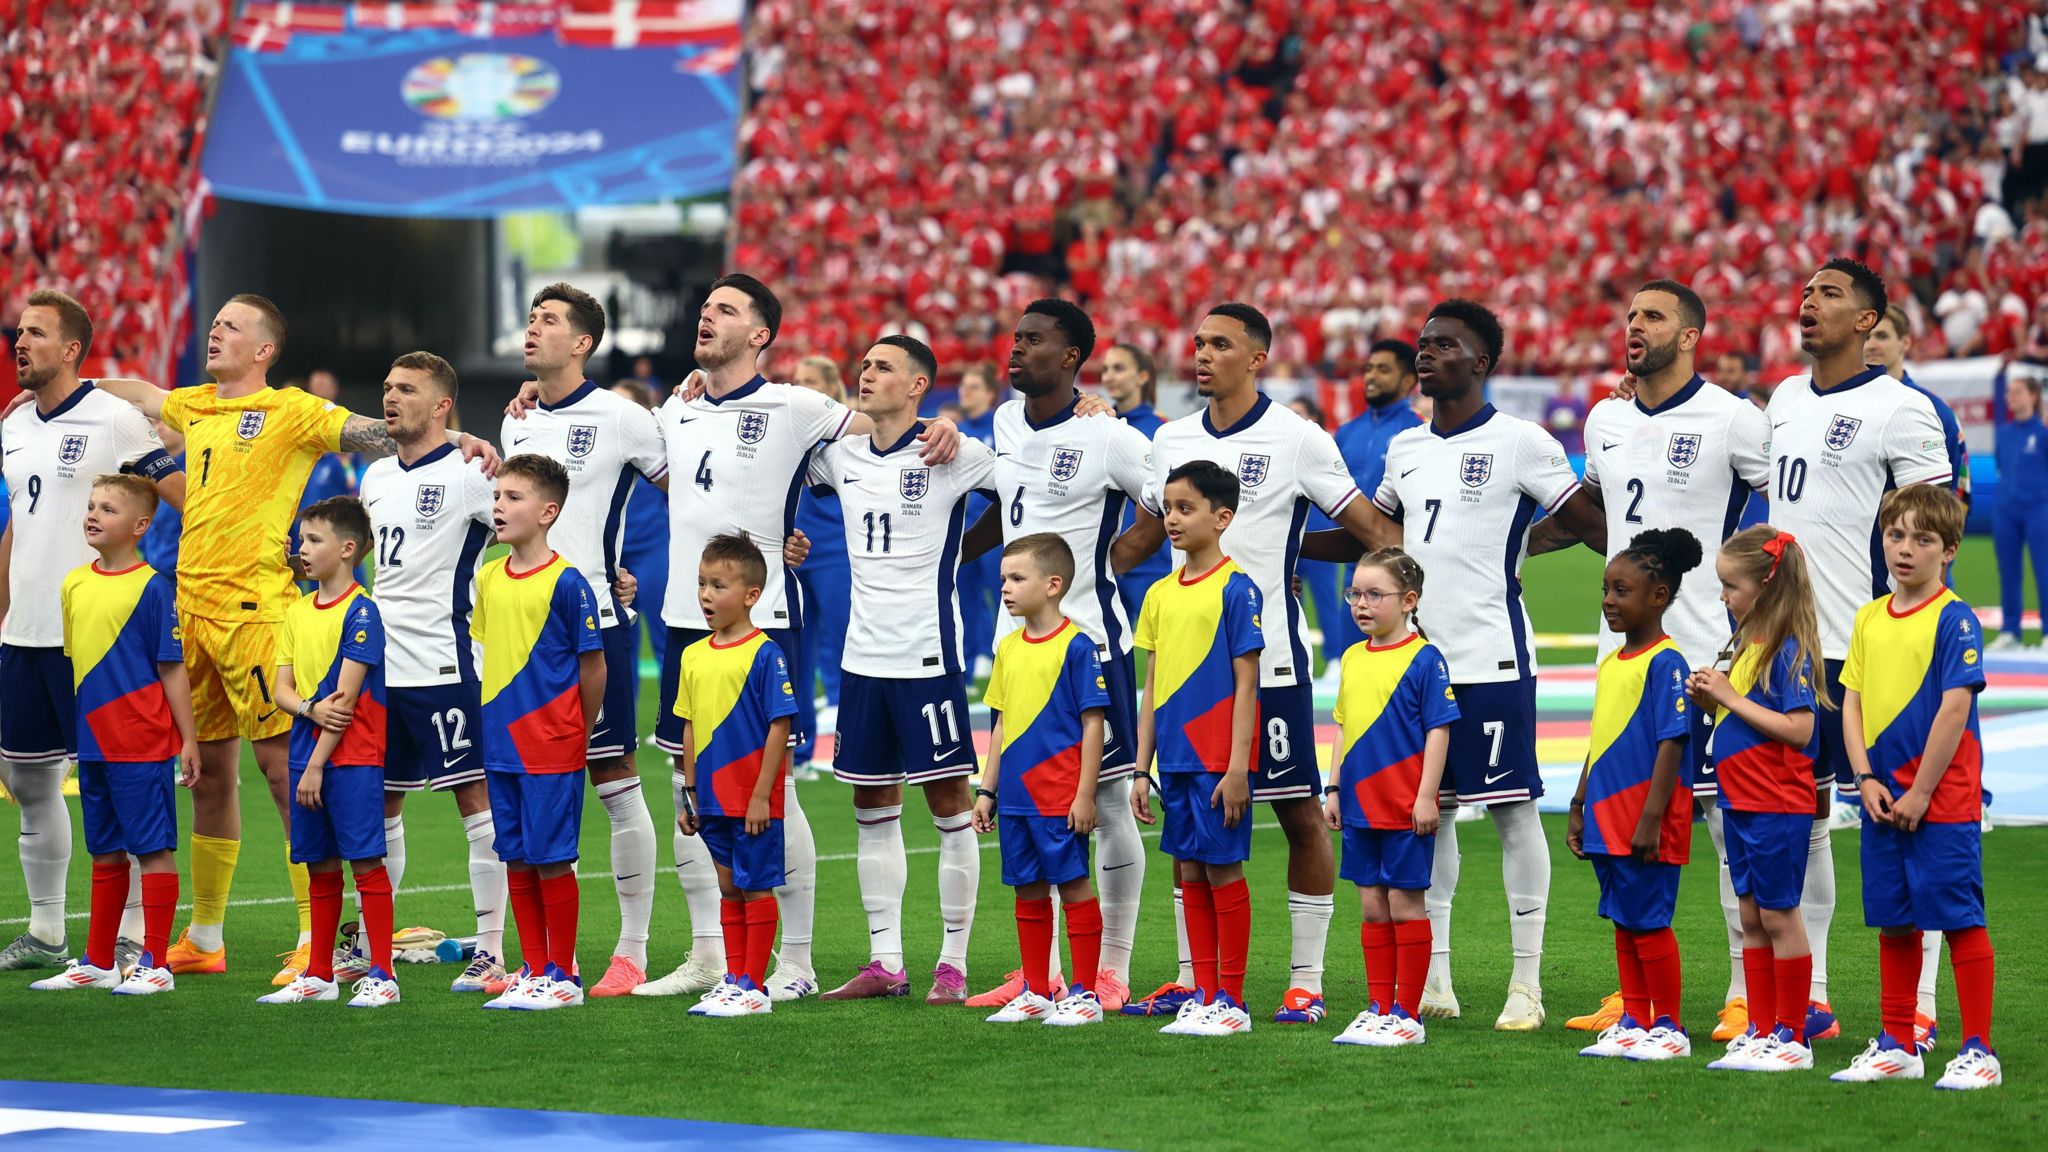 The England team sings the national anthem with the mascots in front of them